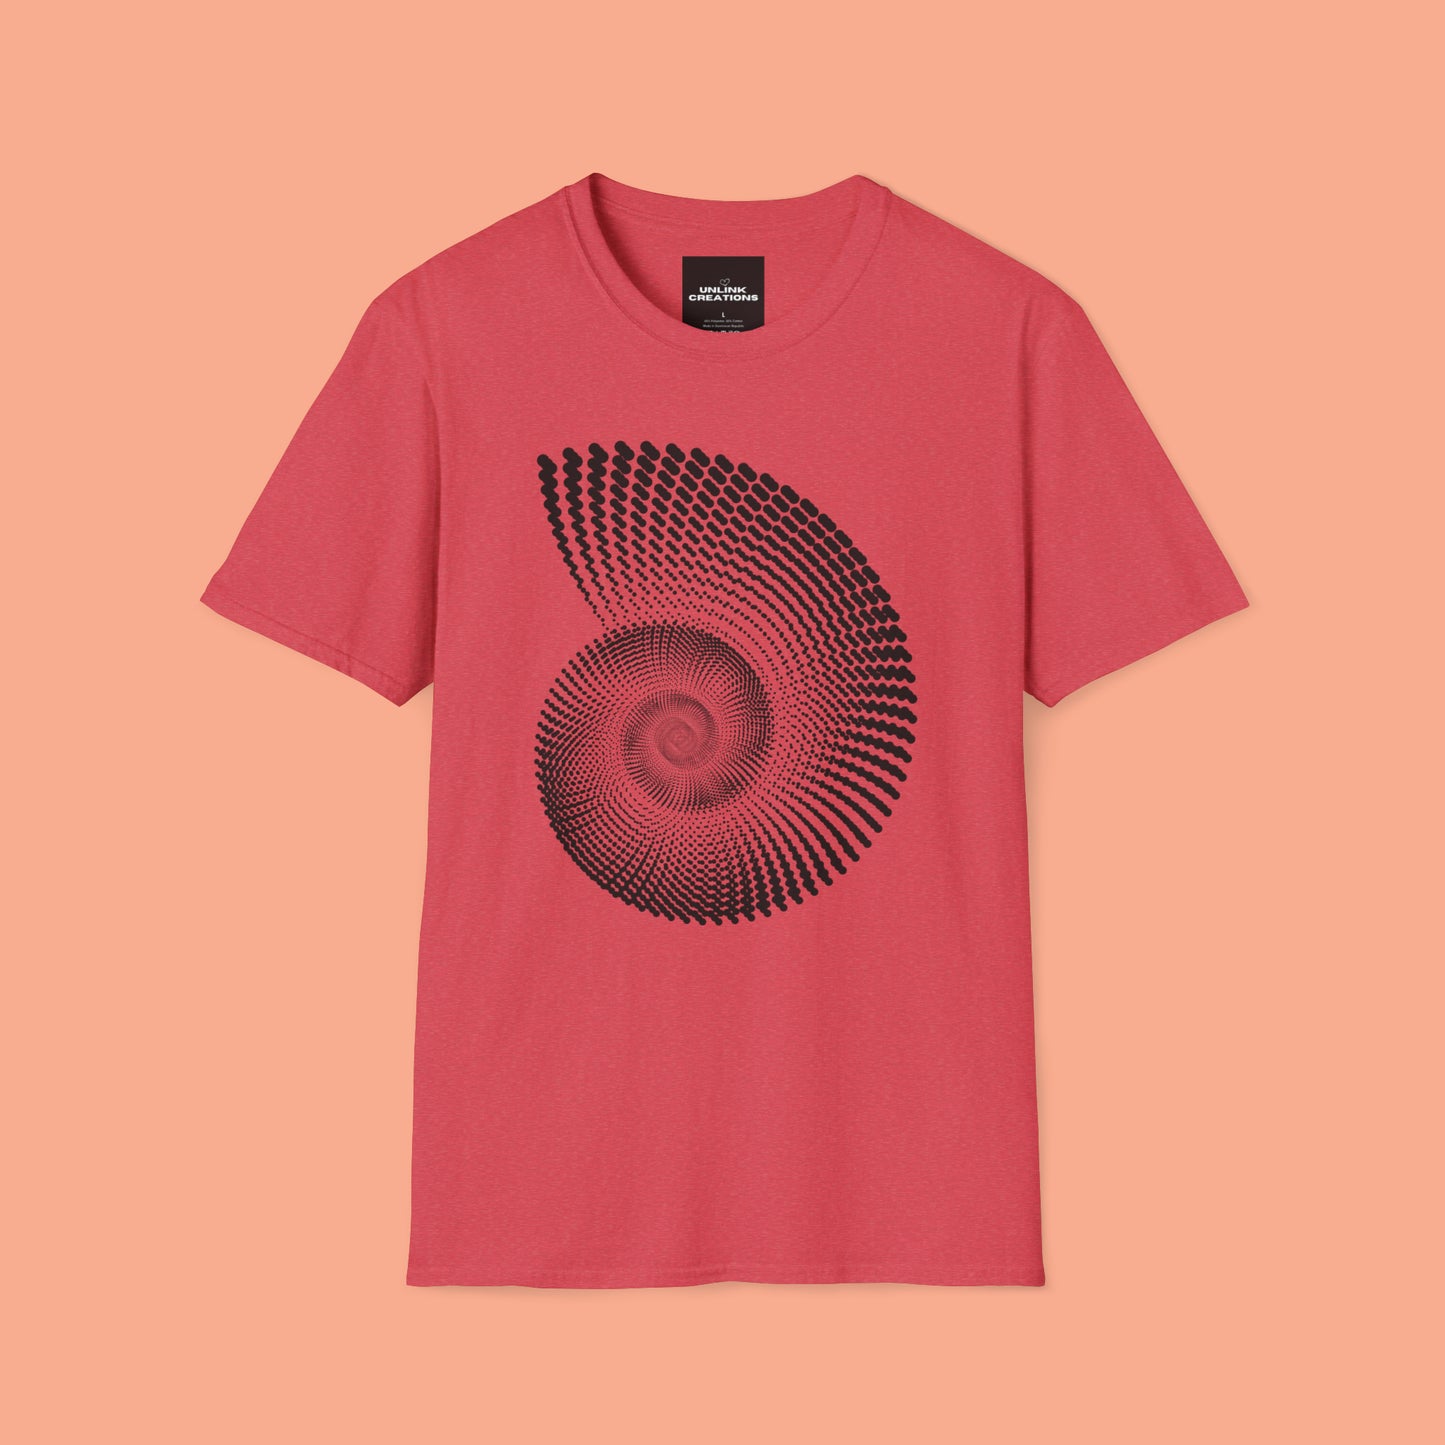 Black nautilus and shell inspired design to celebrate the beauty in nature on this Unisex Softstyle T-Shirt.